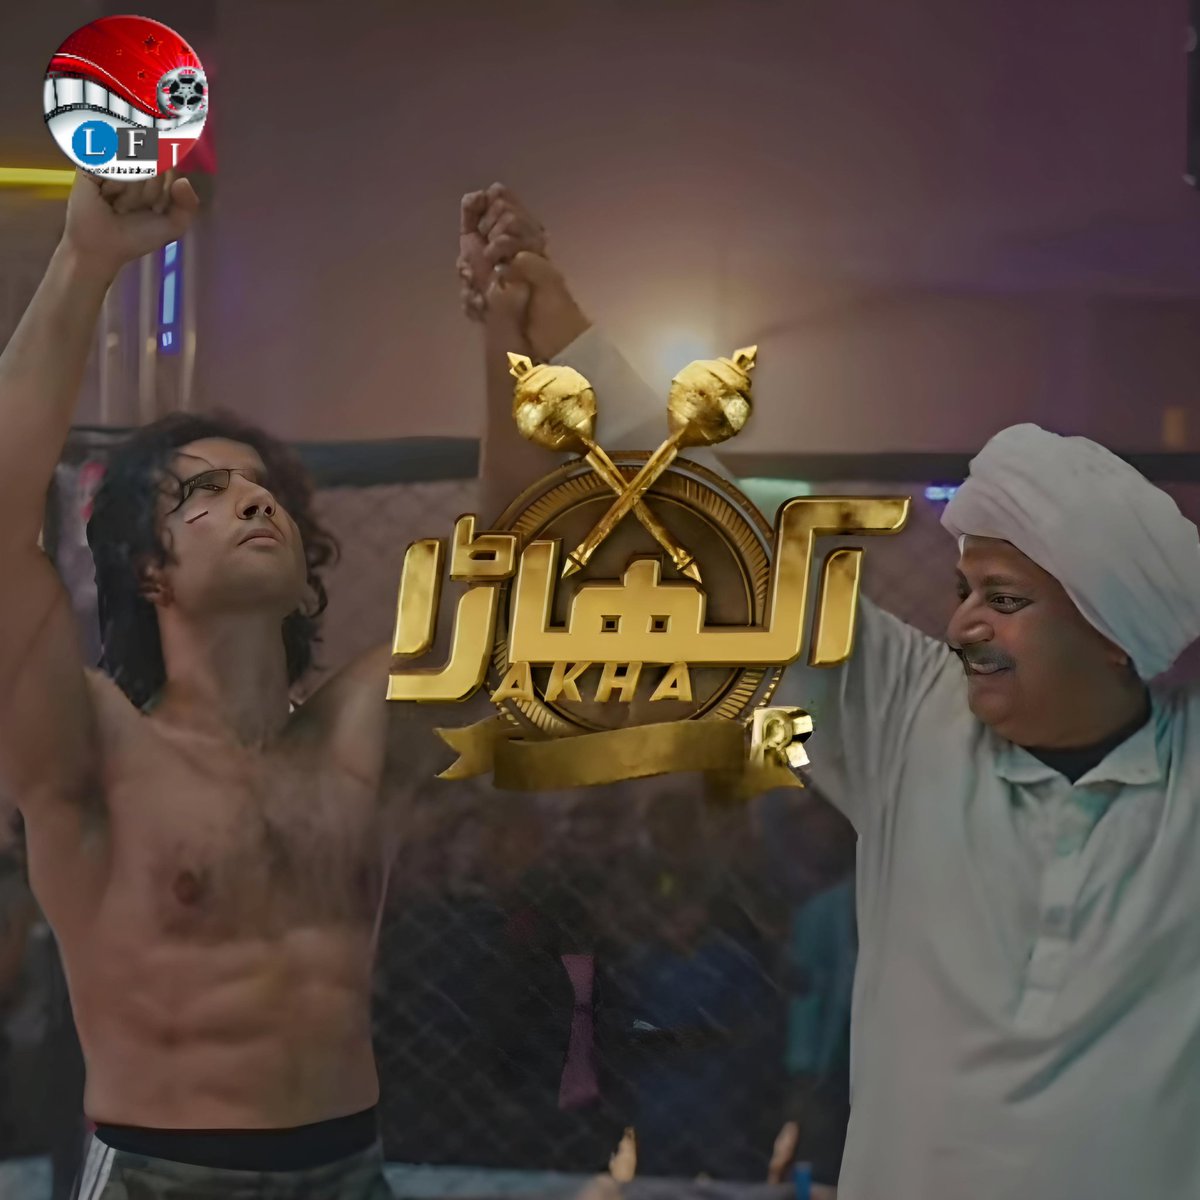 How was the last Episode of Blockbuster and Game Changer Akhara?? Rate the Last Episode. #FerozeKhan #sonyahussyn #Akhara #LollywoodFilmindustry